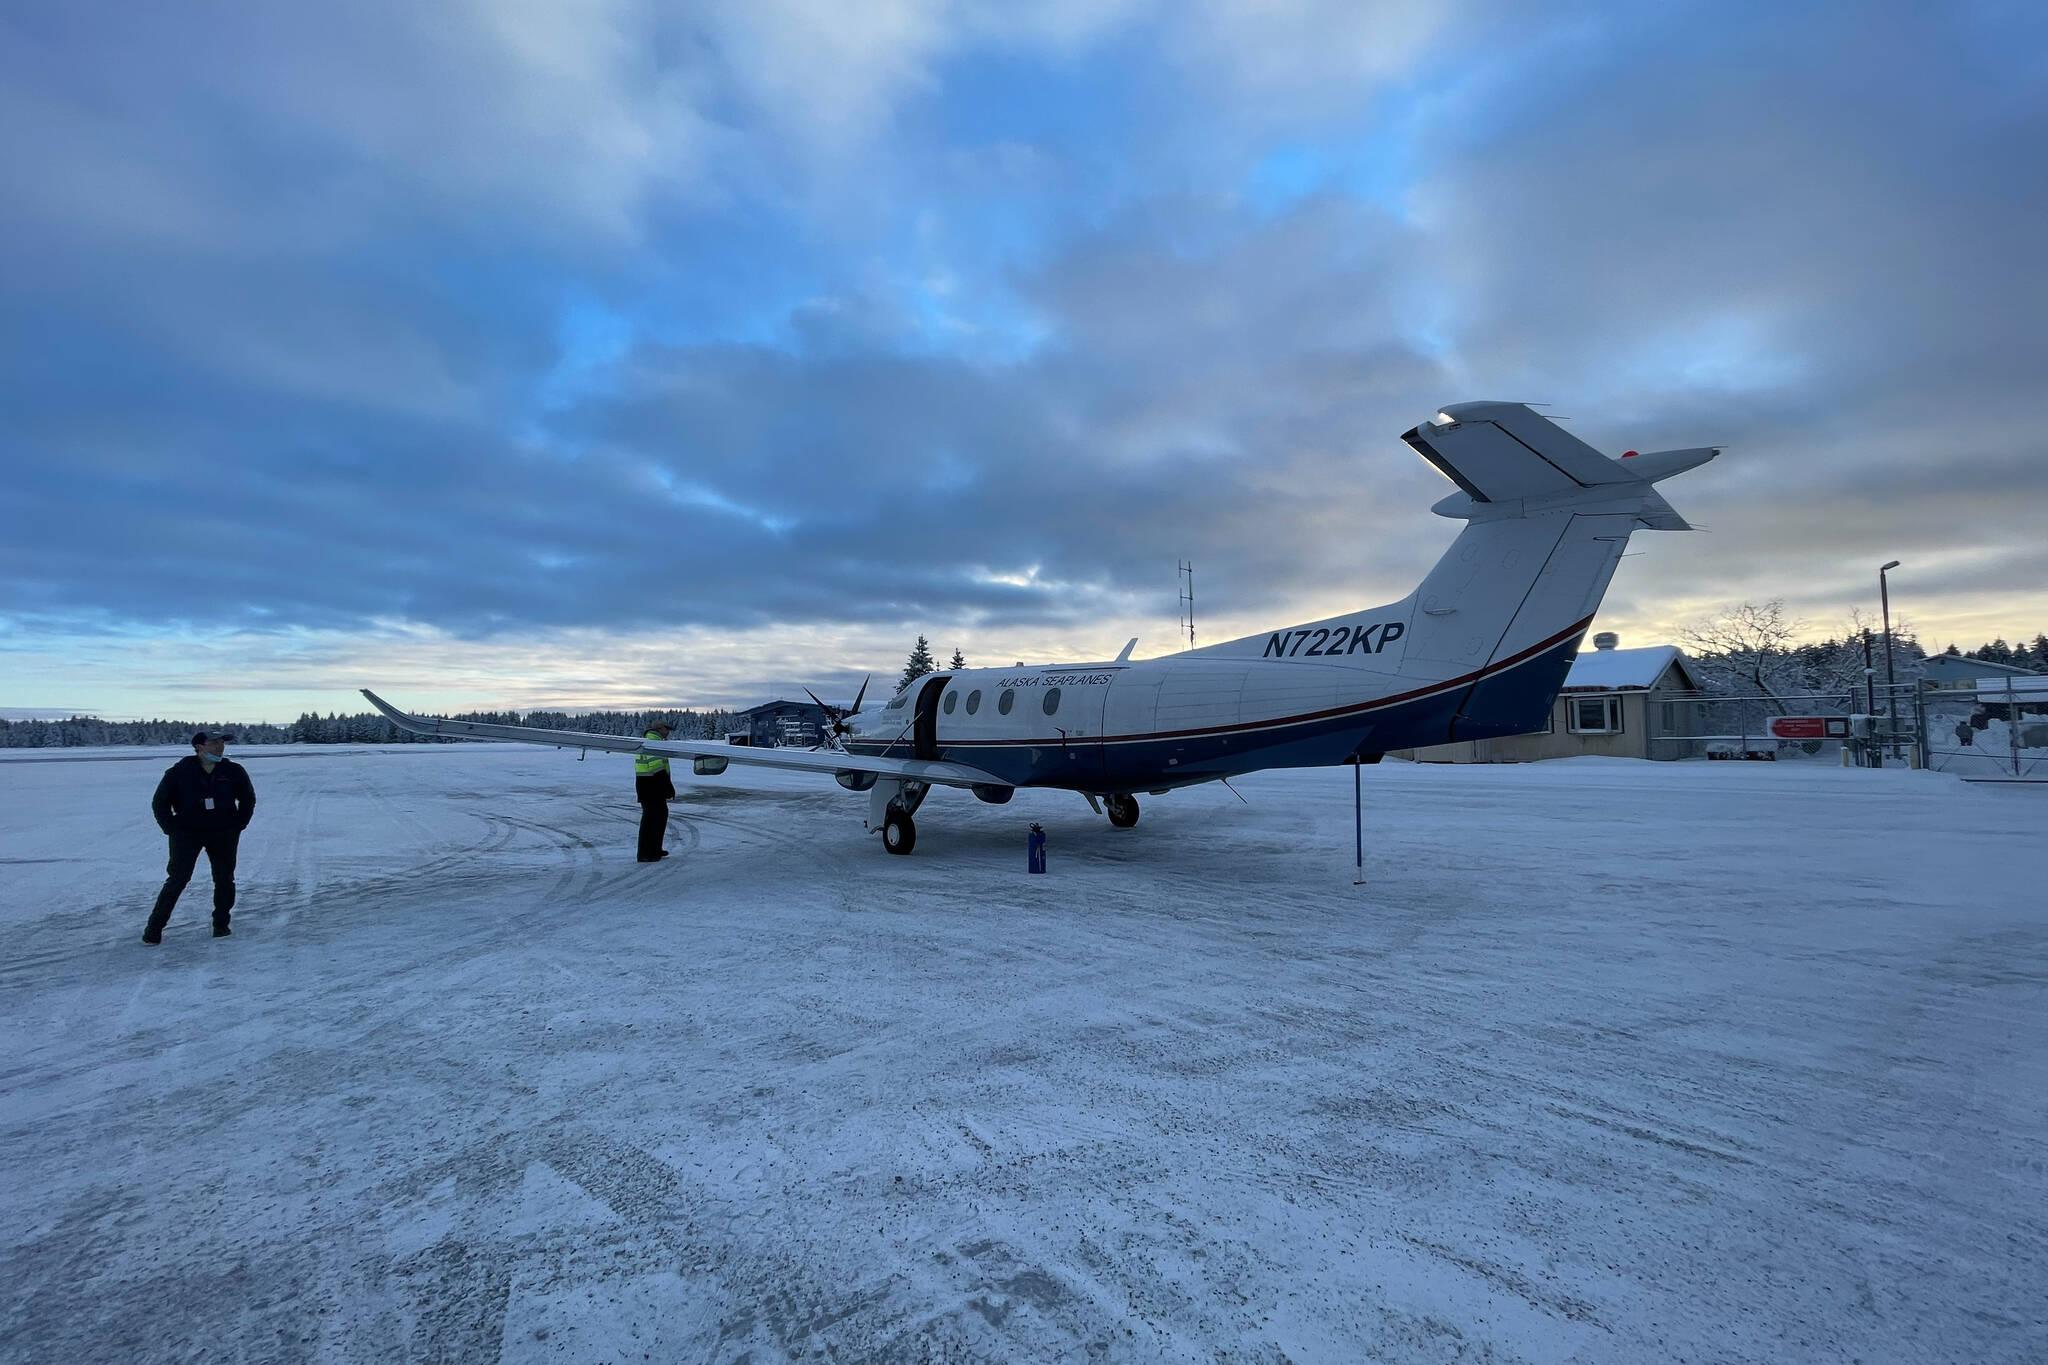 An Alaska Seaplanes Pilatus PC-12 sits on the tarmac at Yakutat Airport on Dec. 5, 2021, a charter flight to help stranded travelers leave after an airport instrument failure prevented any commercial flights from reaching the small city. The National Weather Service is currently working on fixing the problem. (Courtesy photo / Norton Gregory)